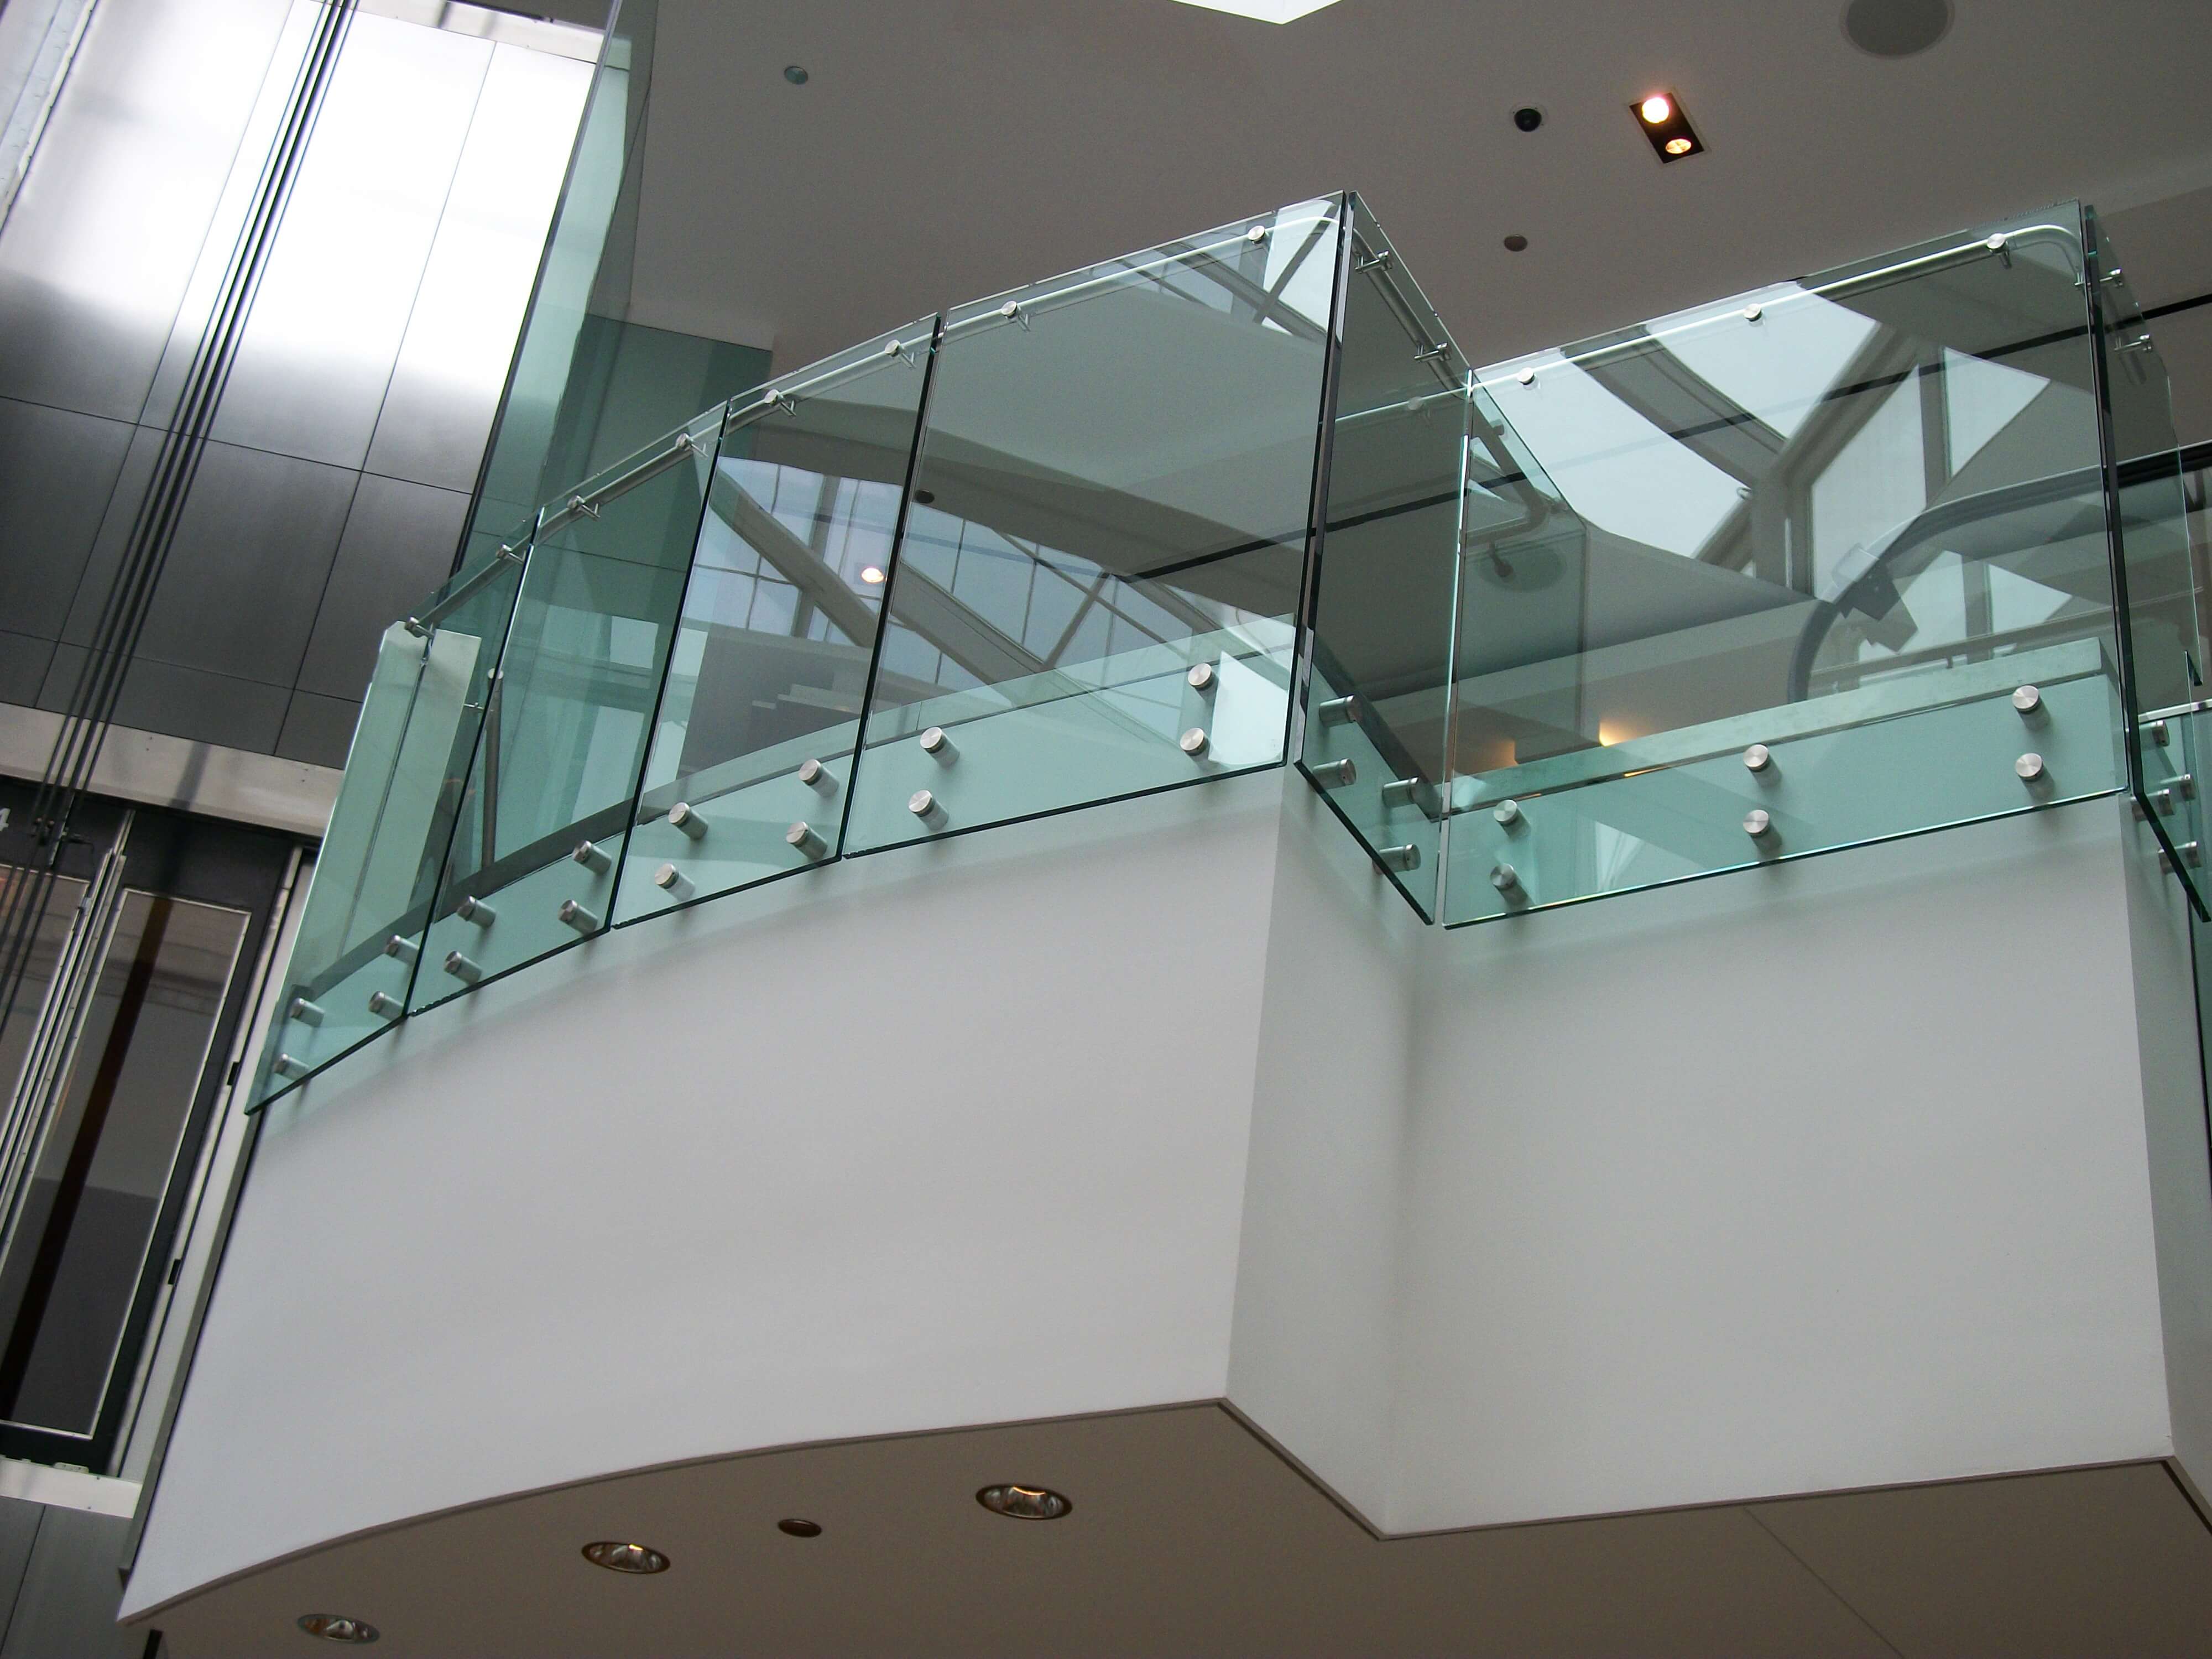 Upward view at a Shopping Mall Chicago, IL, Optik guardrail with clear glass